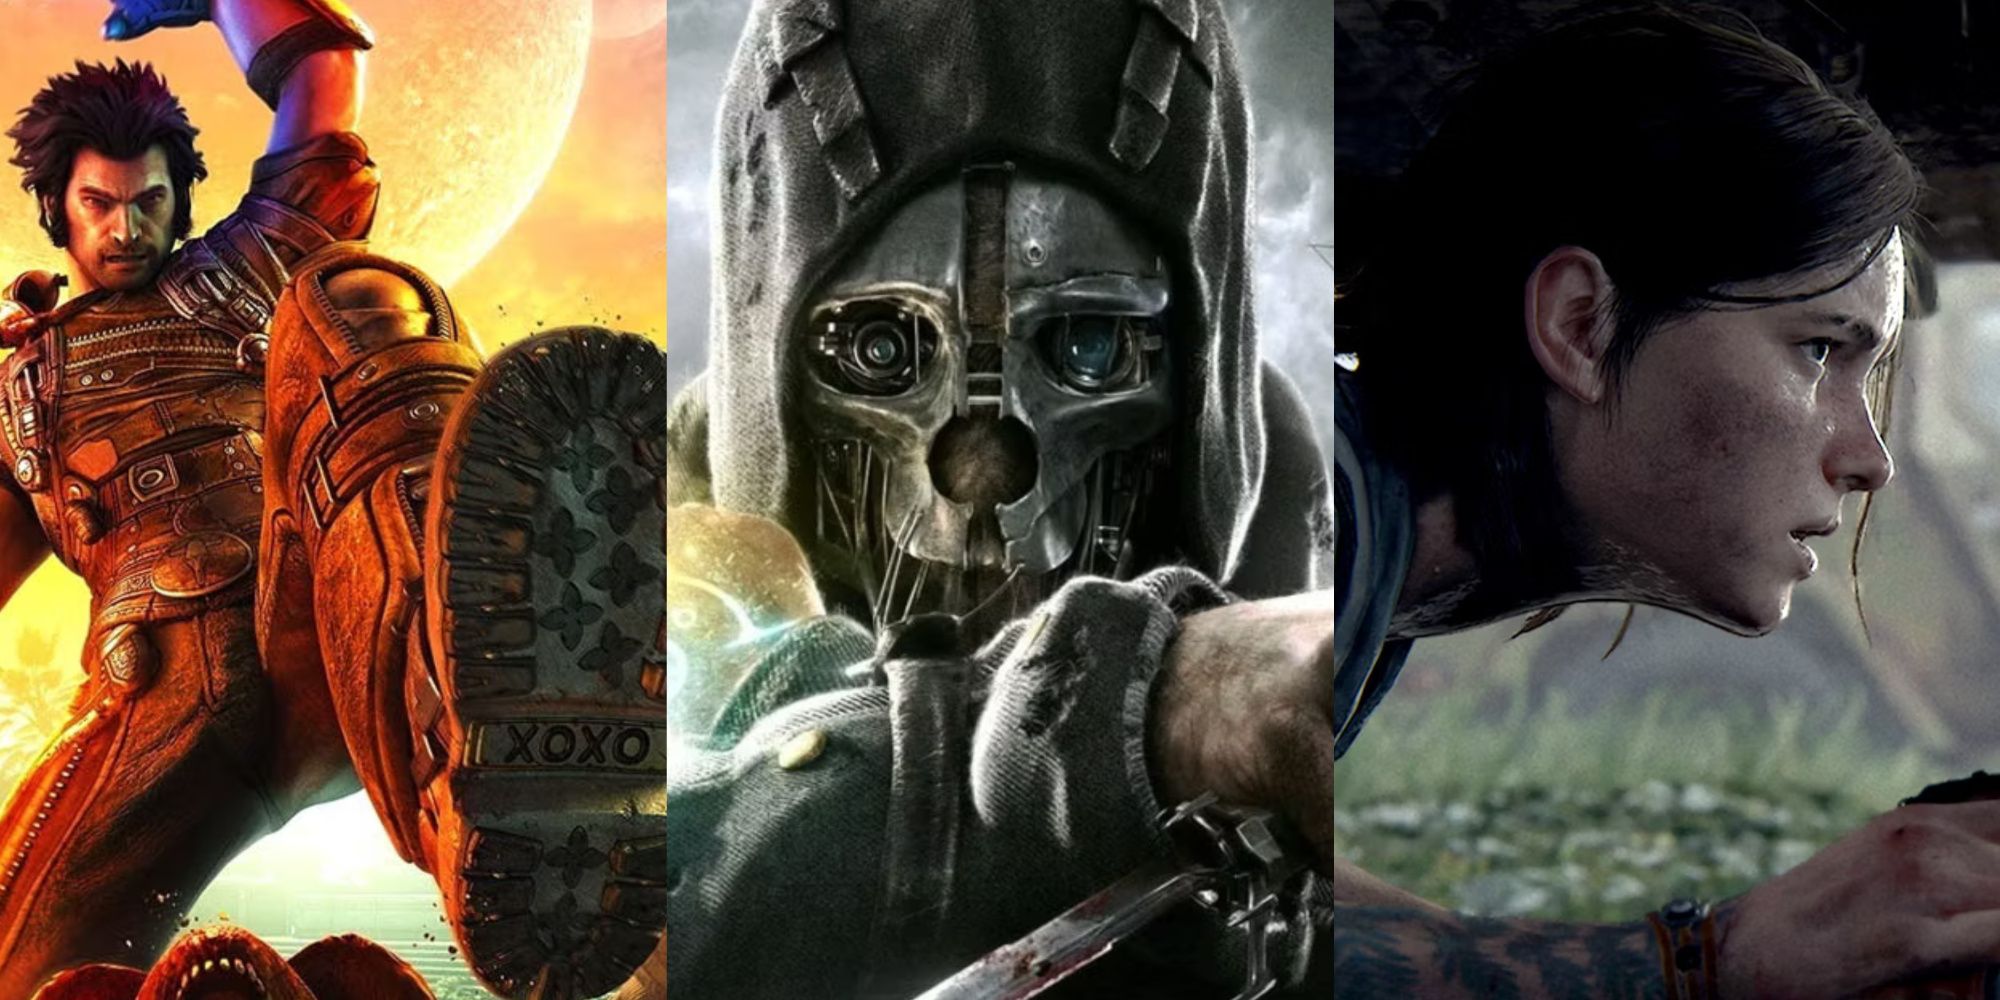 Split image of characters from various games, including bulletstorm, dishonored, and the last of us